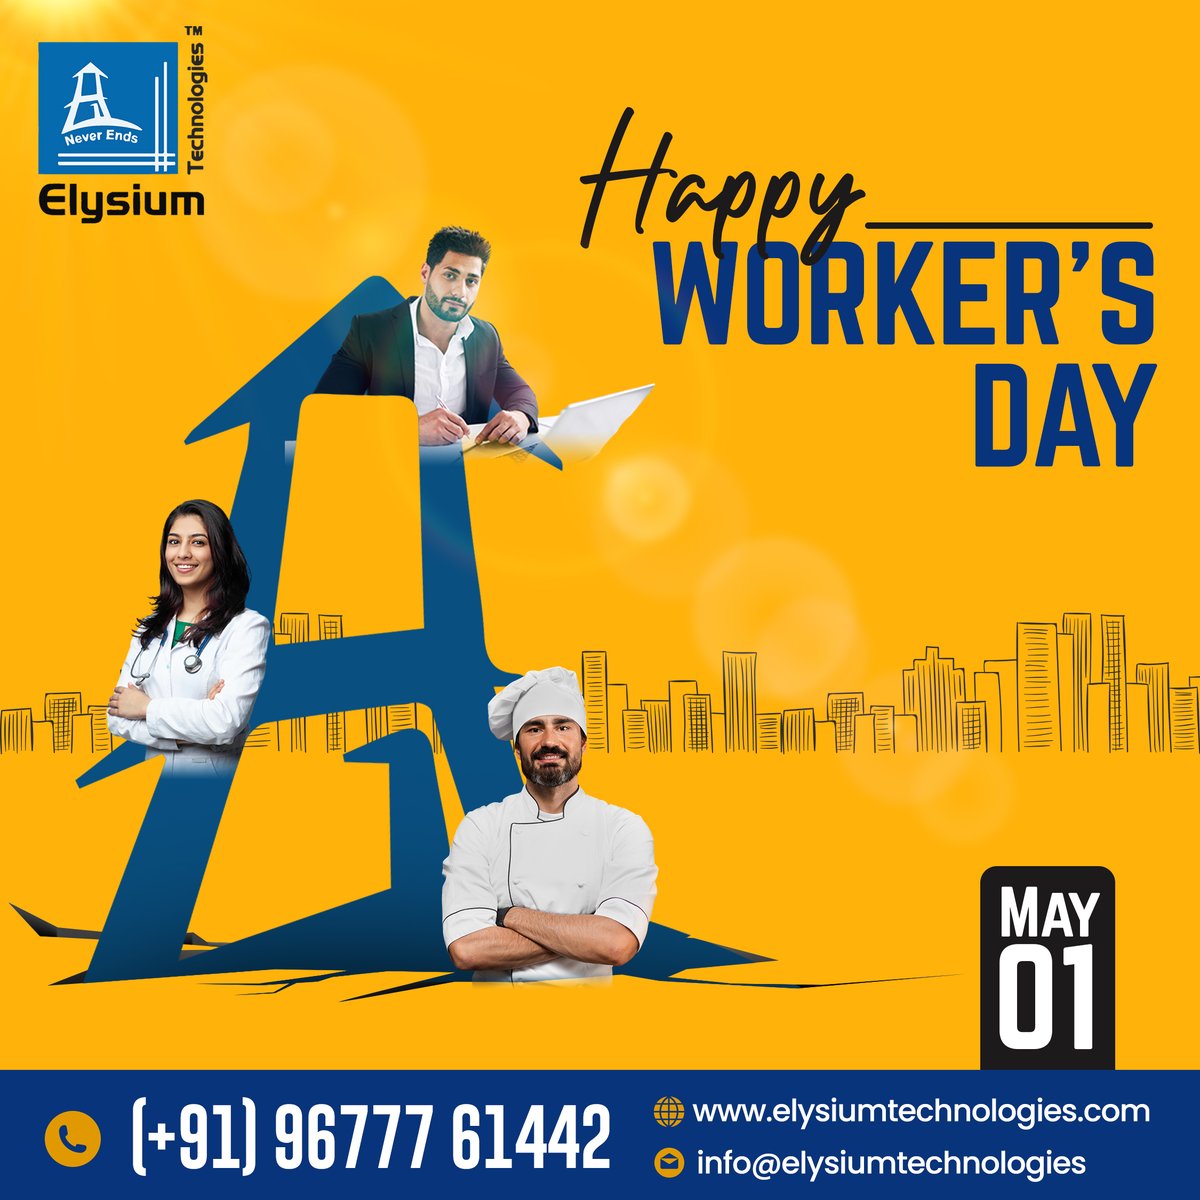 🎉 Happy Labour Day from Elysium Technologies! 🎉

Free Consultancy Call us now - +91 99447-93398
Do refer our website rfr.bz/tla6q7r
Location-rfr.bz/tla6q7s

#elysiumtechnologies #Labourdaywishes #ETPL #datascienceconsultation #ConsultingServices